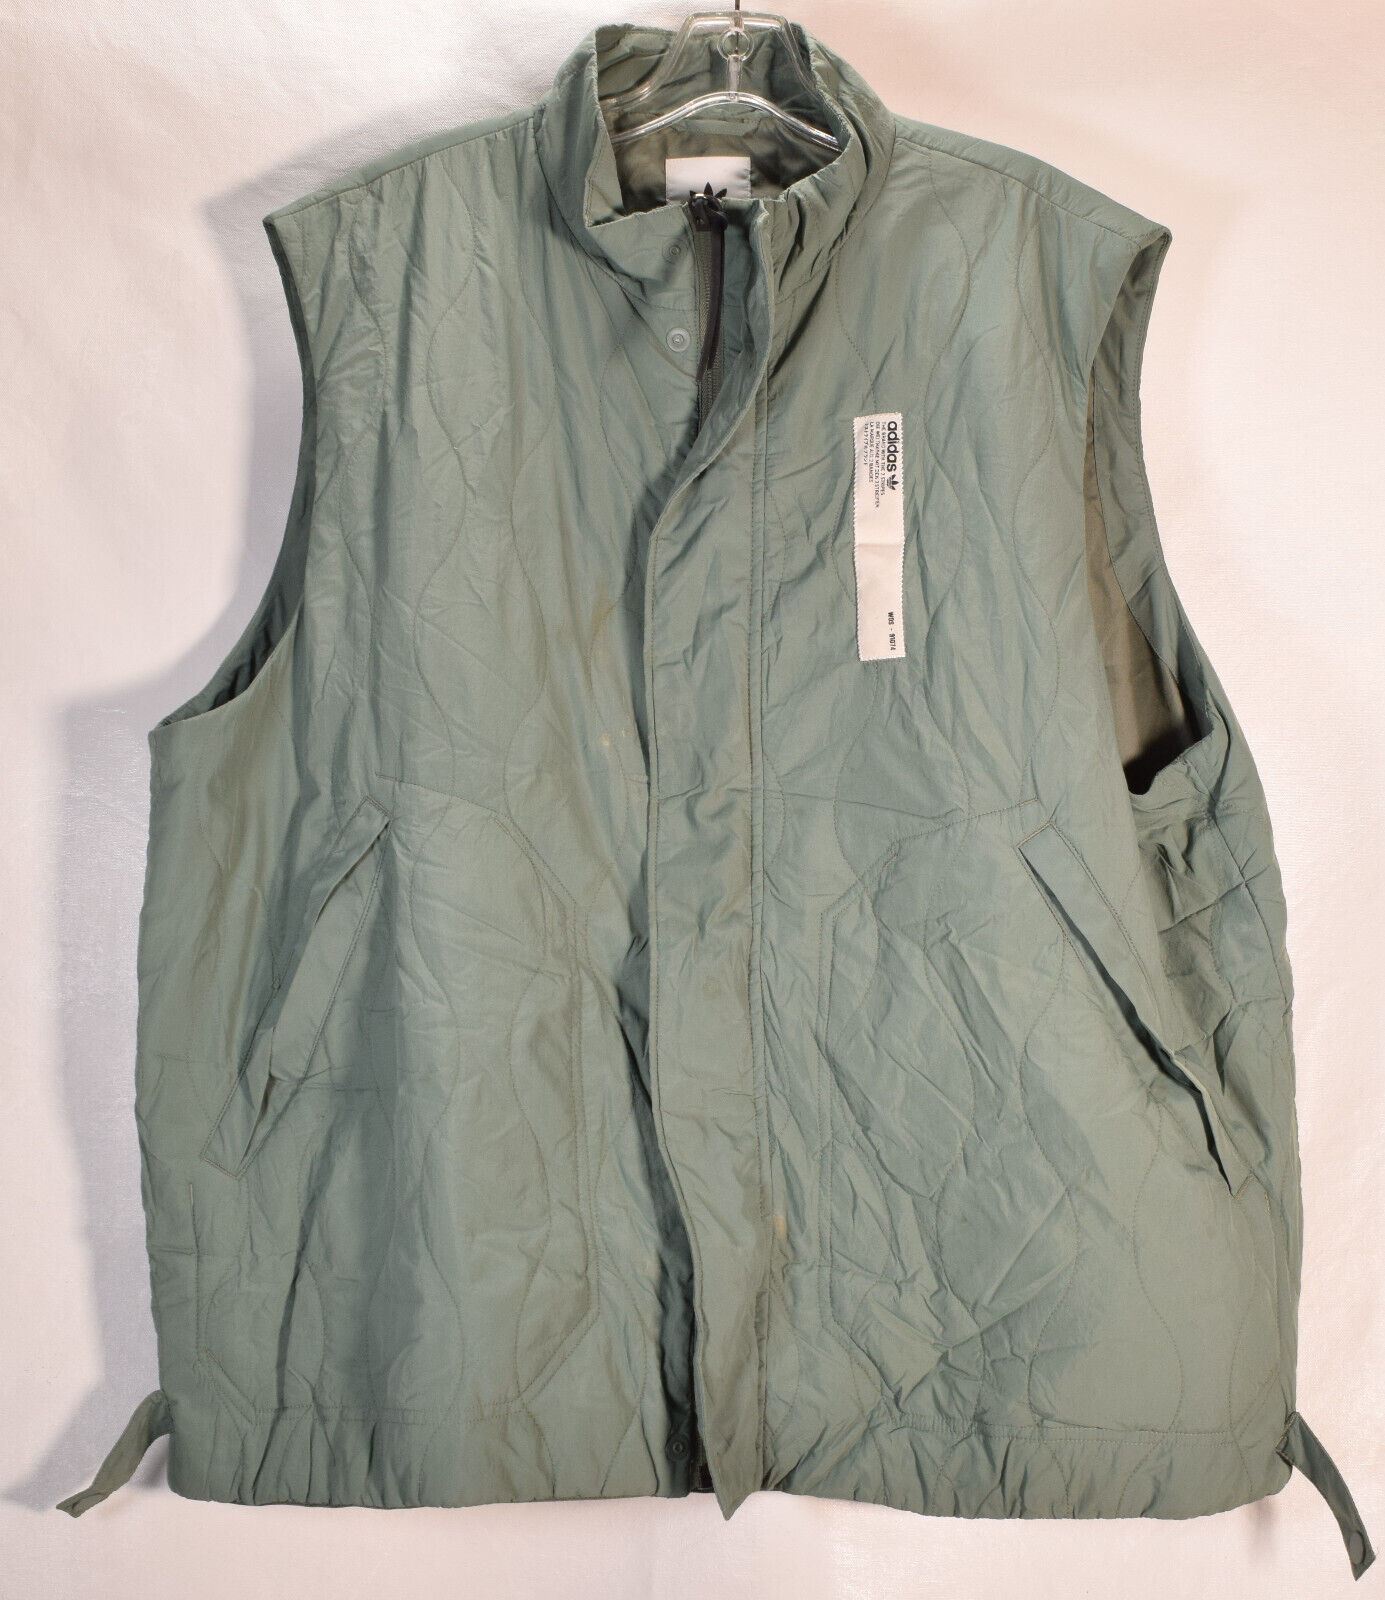 Primary image for Adidas Mens Puffer Vest Mint Wos-91074 XL